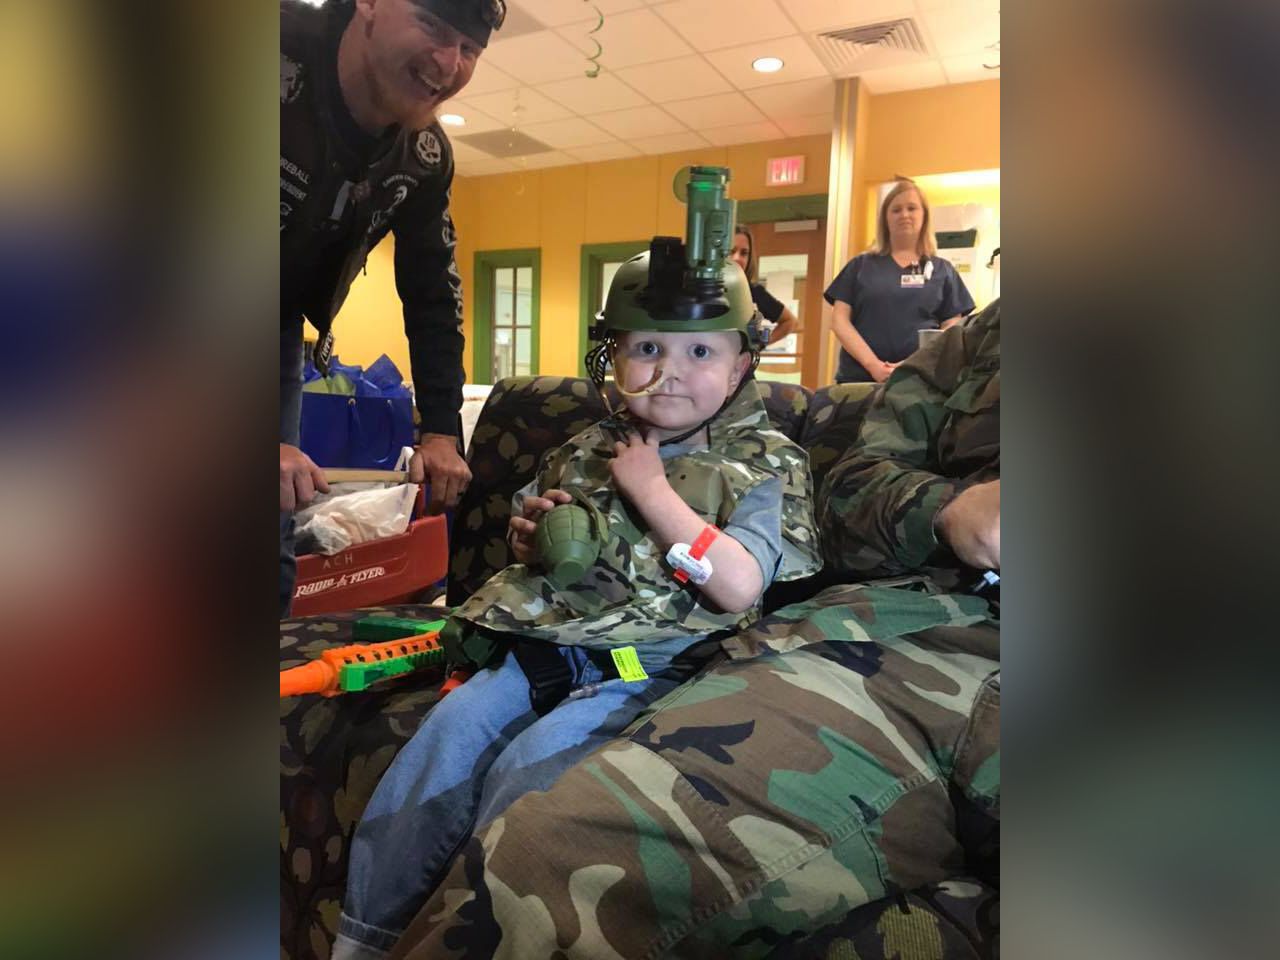 A 5-year-old boy with cancer dreamed of being a soldier, so dozens of  service members came to his funeral | CNN